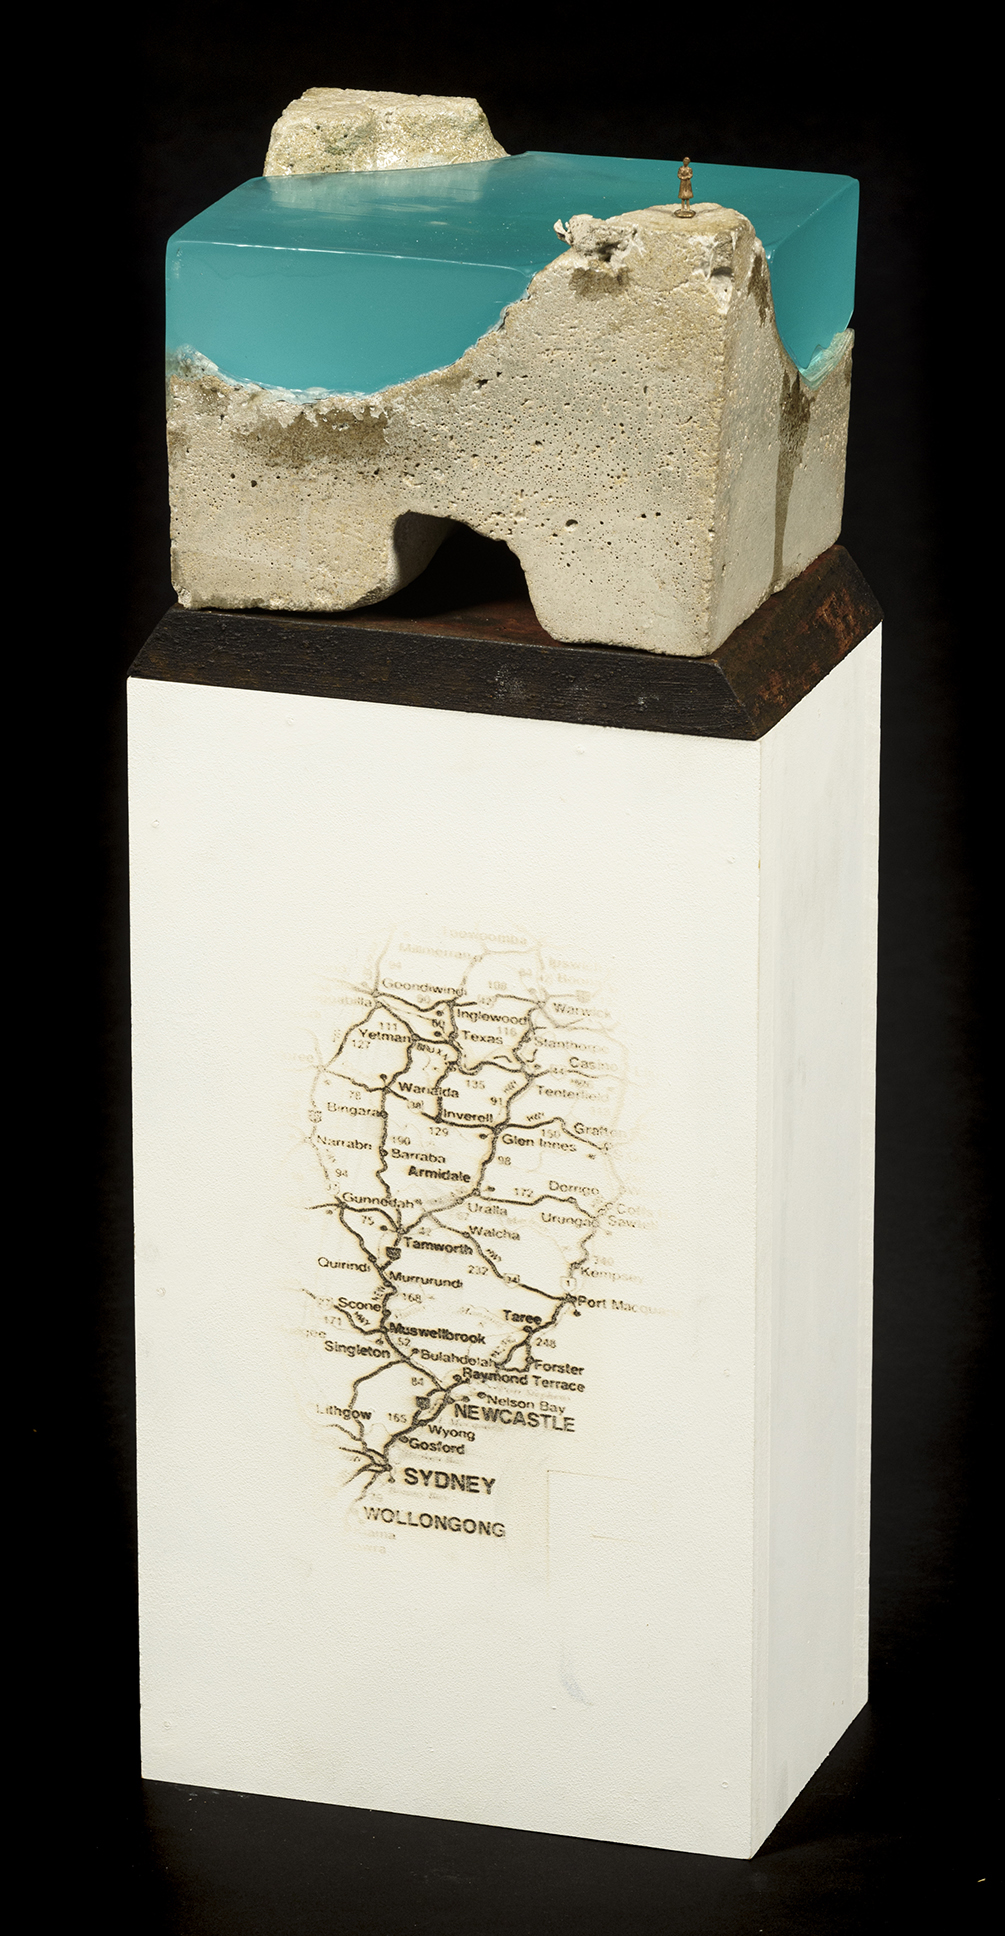 A sculpture of aqua coloured epoxy resin and concrete on a white plinth that has a map applied to its surface.